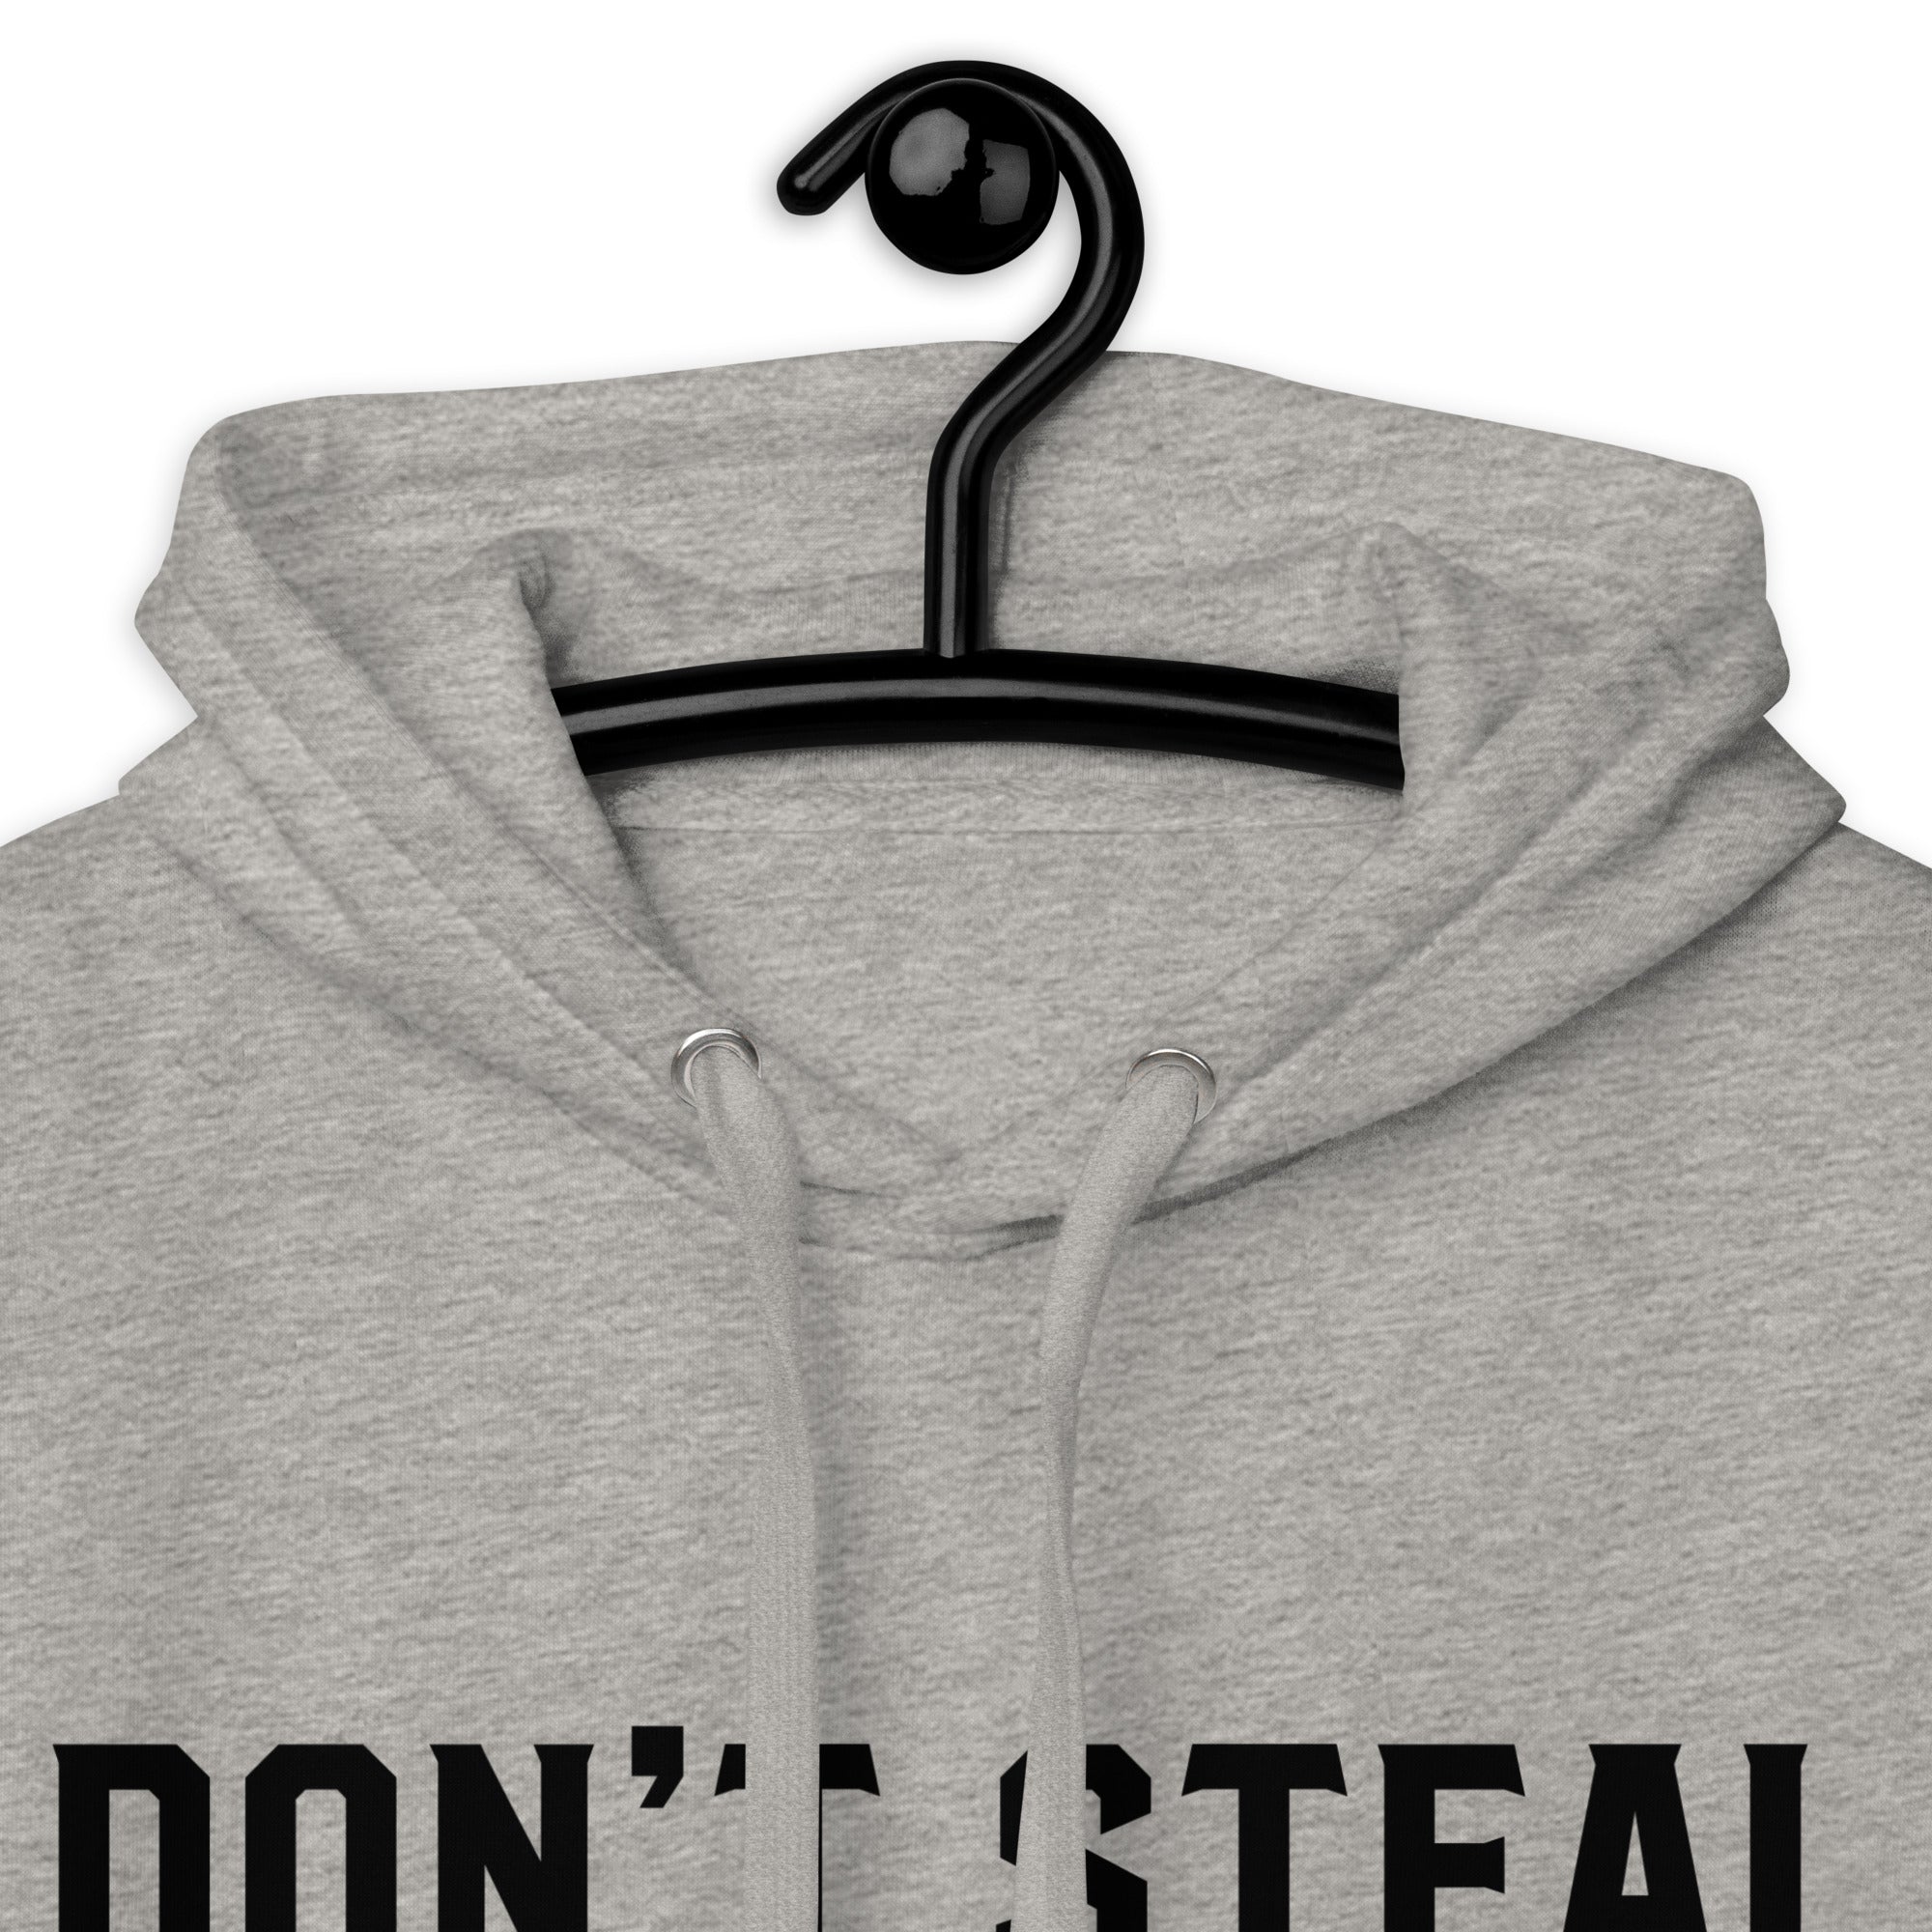 Don't Steal the Government Hates Competition Unisex Hoodie